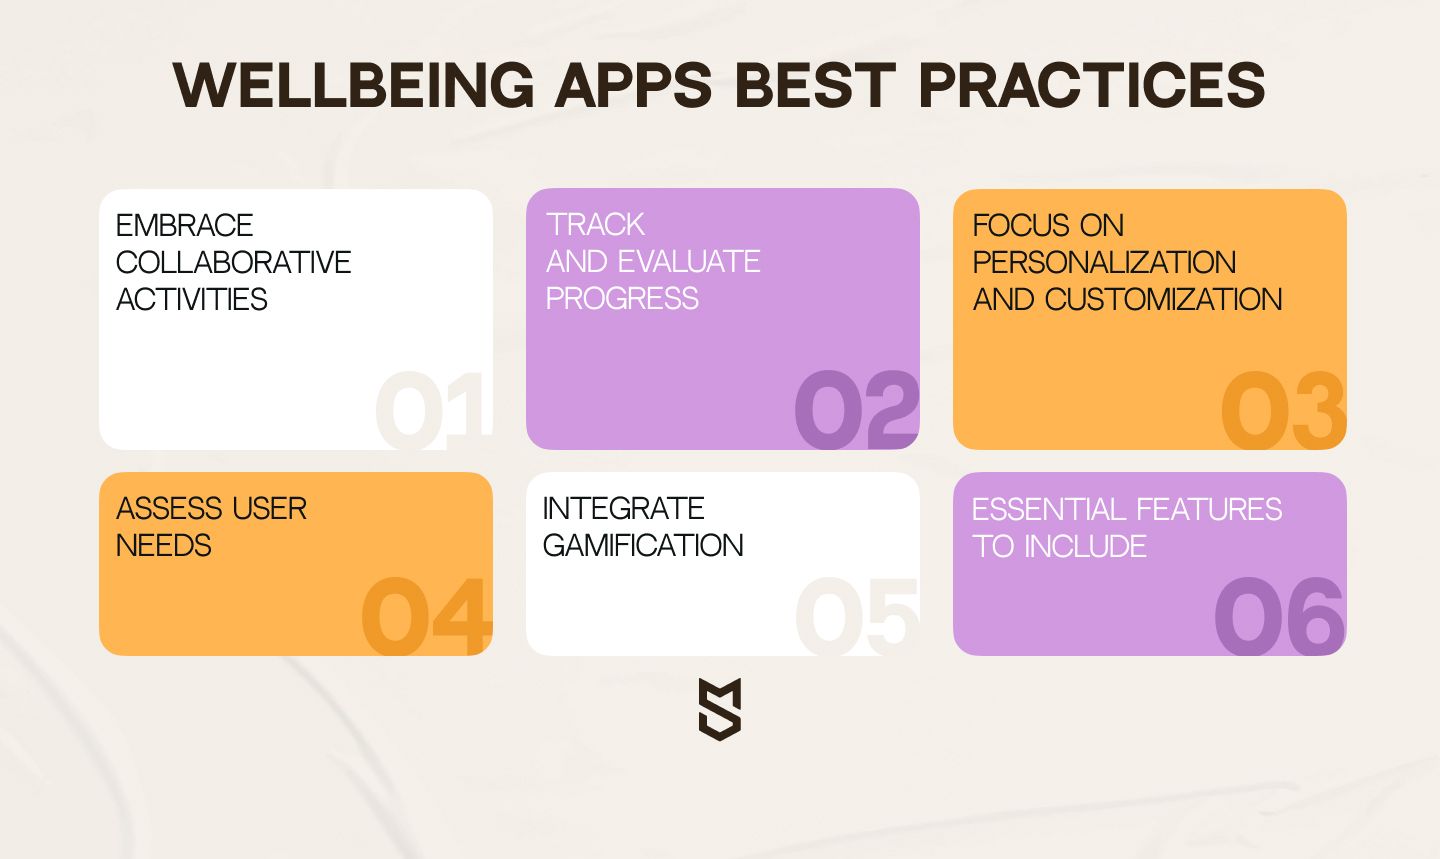 Best practices of wellbeing apps